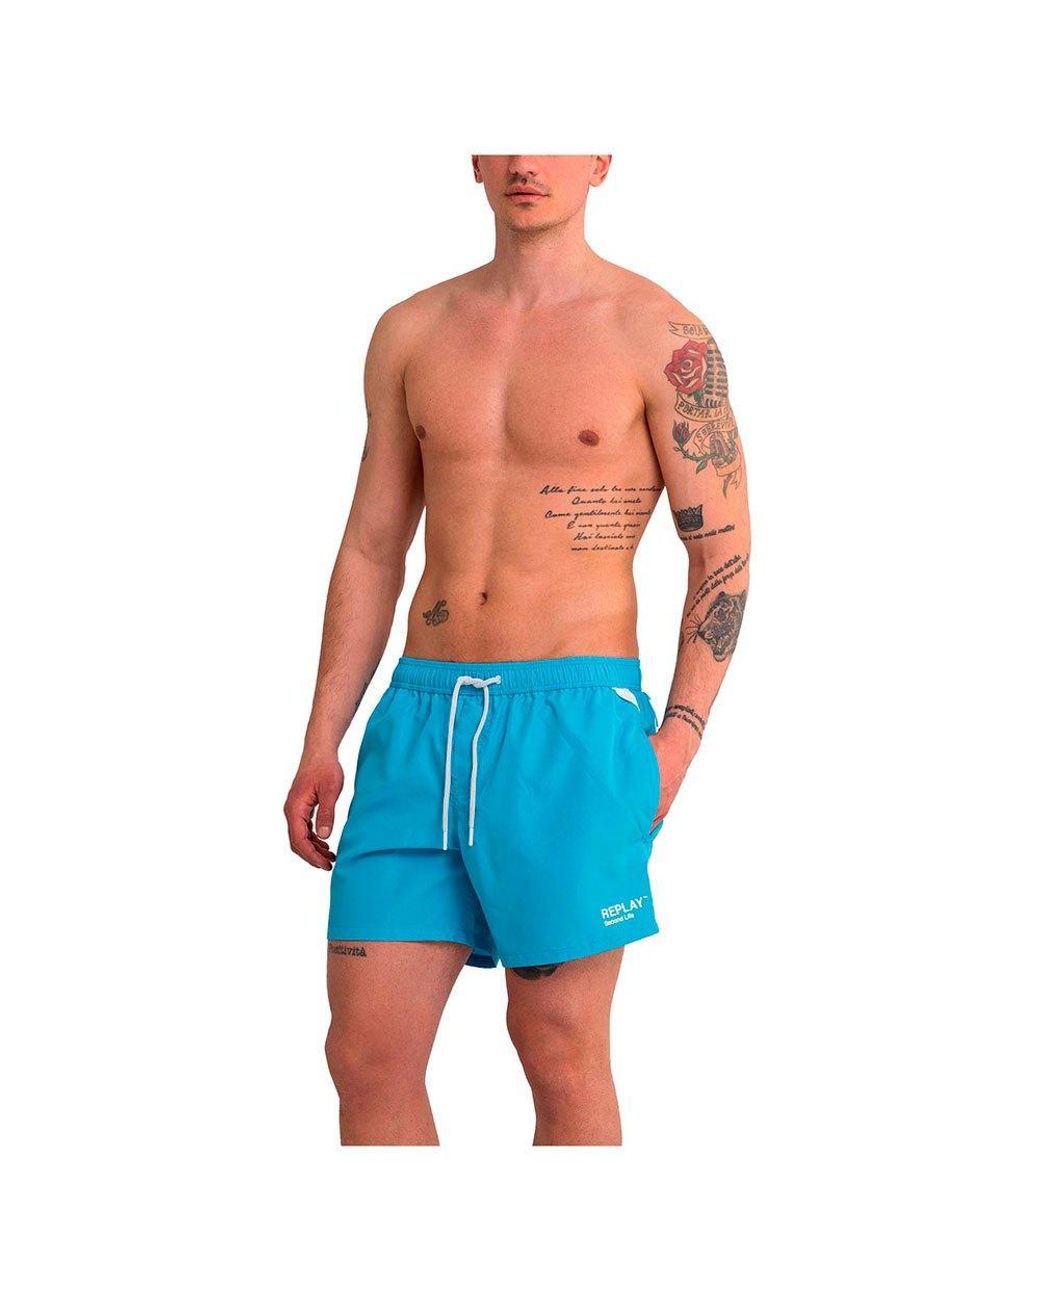 REPLAY MENS SWIM SHORTS SIZE MEDIUM NEW WITH TAGS AND PACKAGING BEACHWEAR 